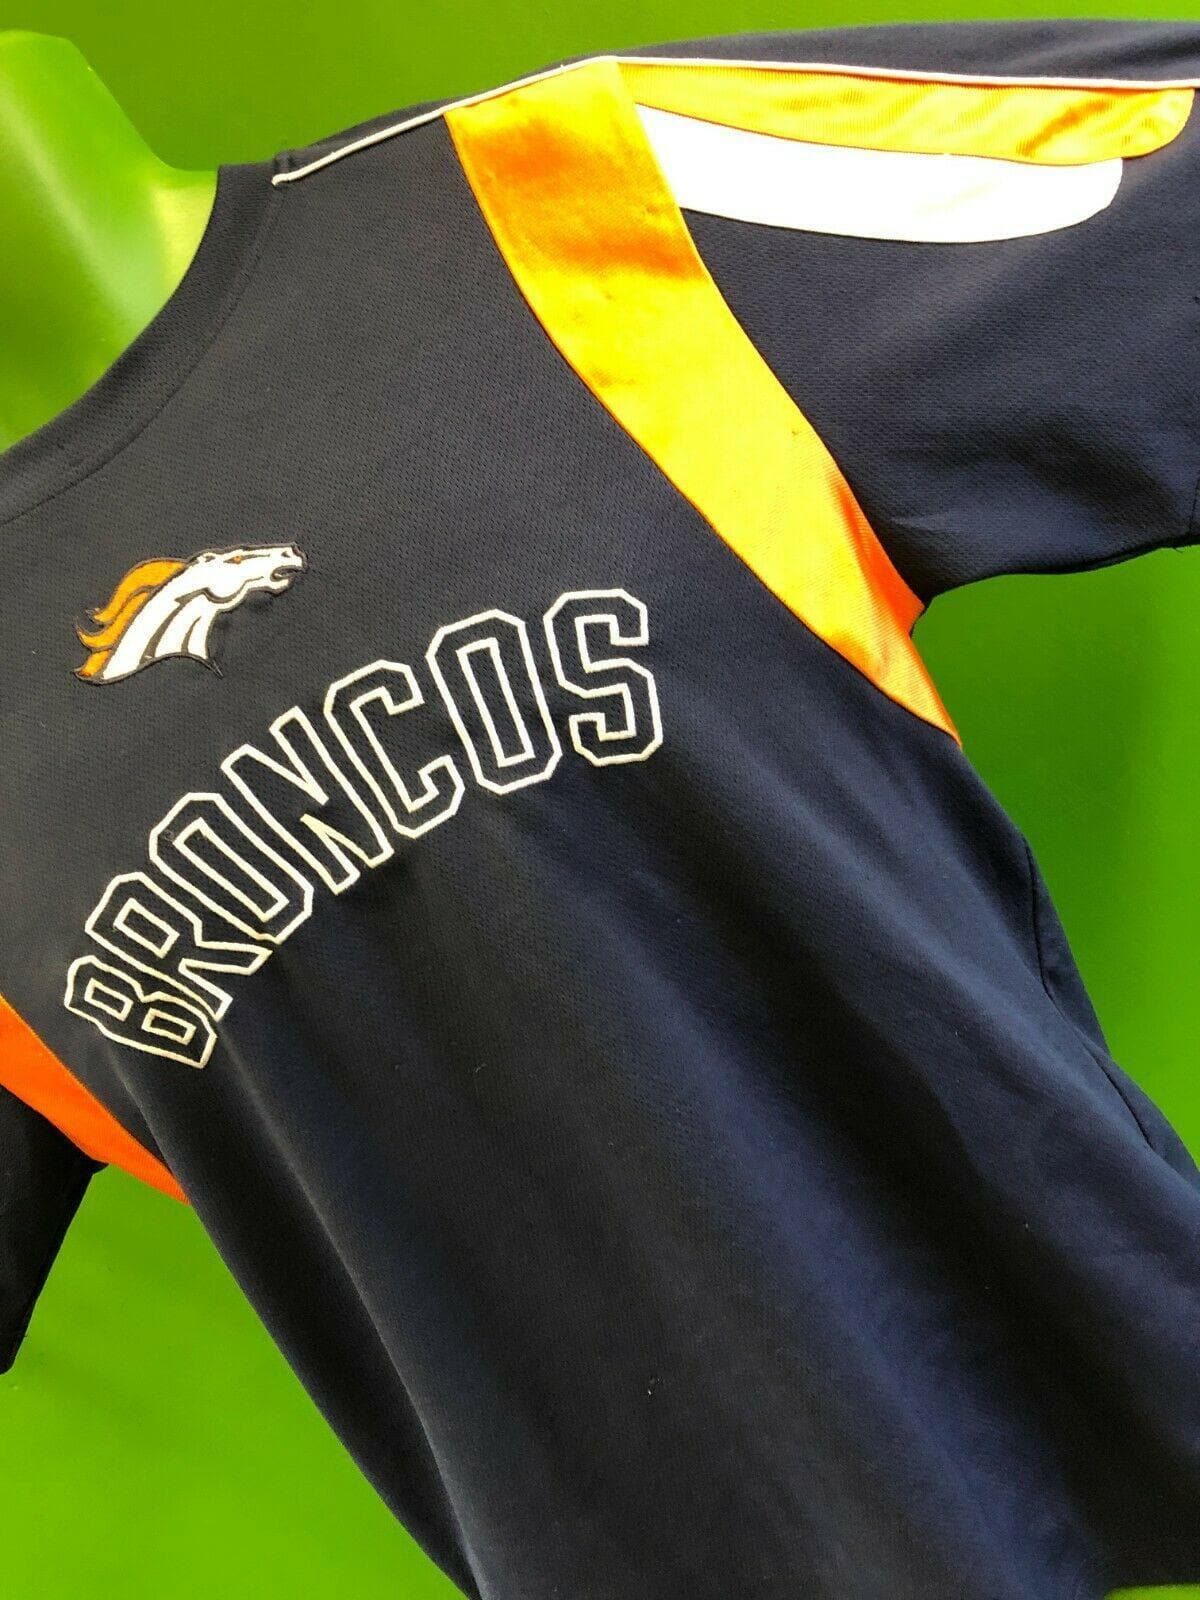 NFL Denver Broncos Jersey-Style Top Youth 2X-Large 18-20